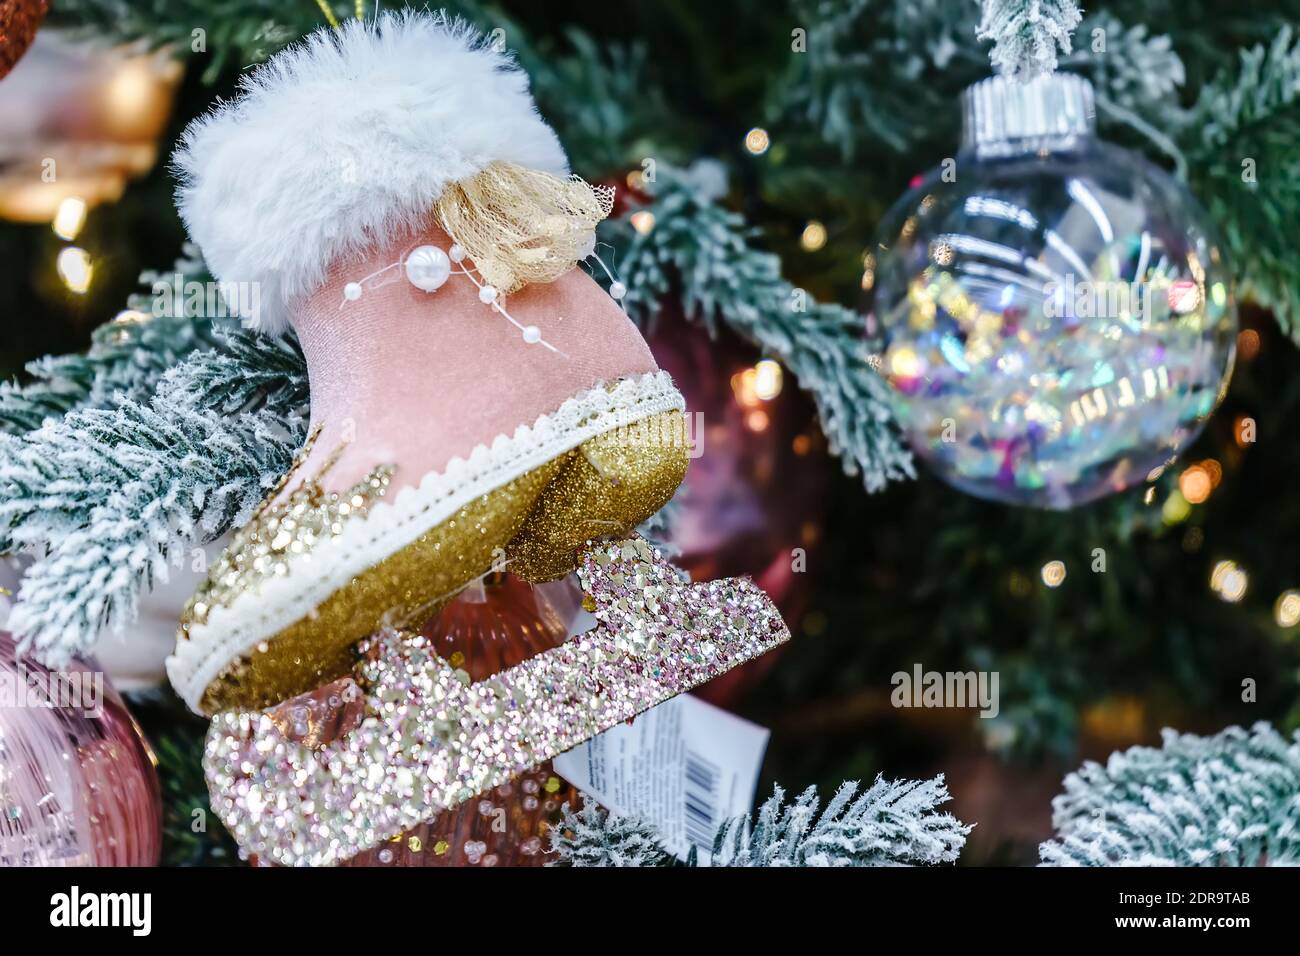 Close-up of a Christmas tree decorated with pink toys Stock Photo